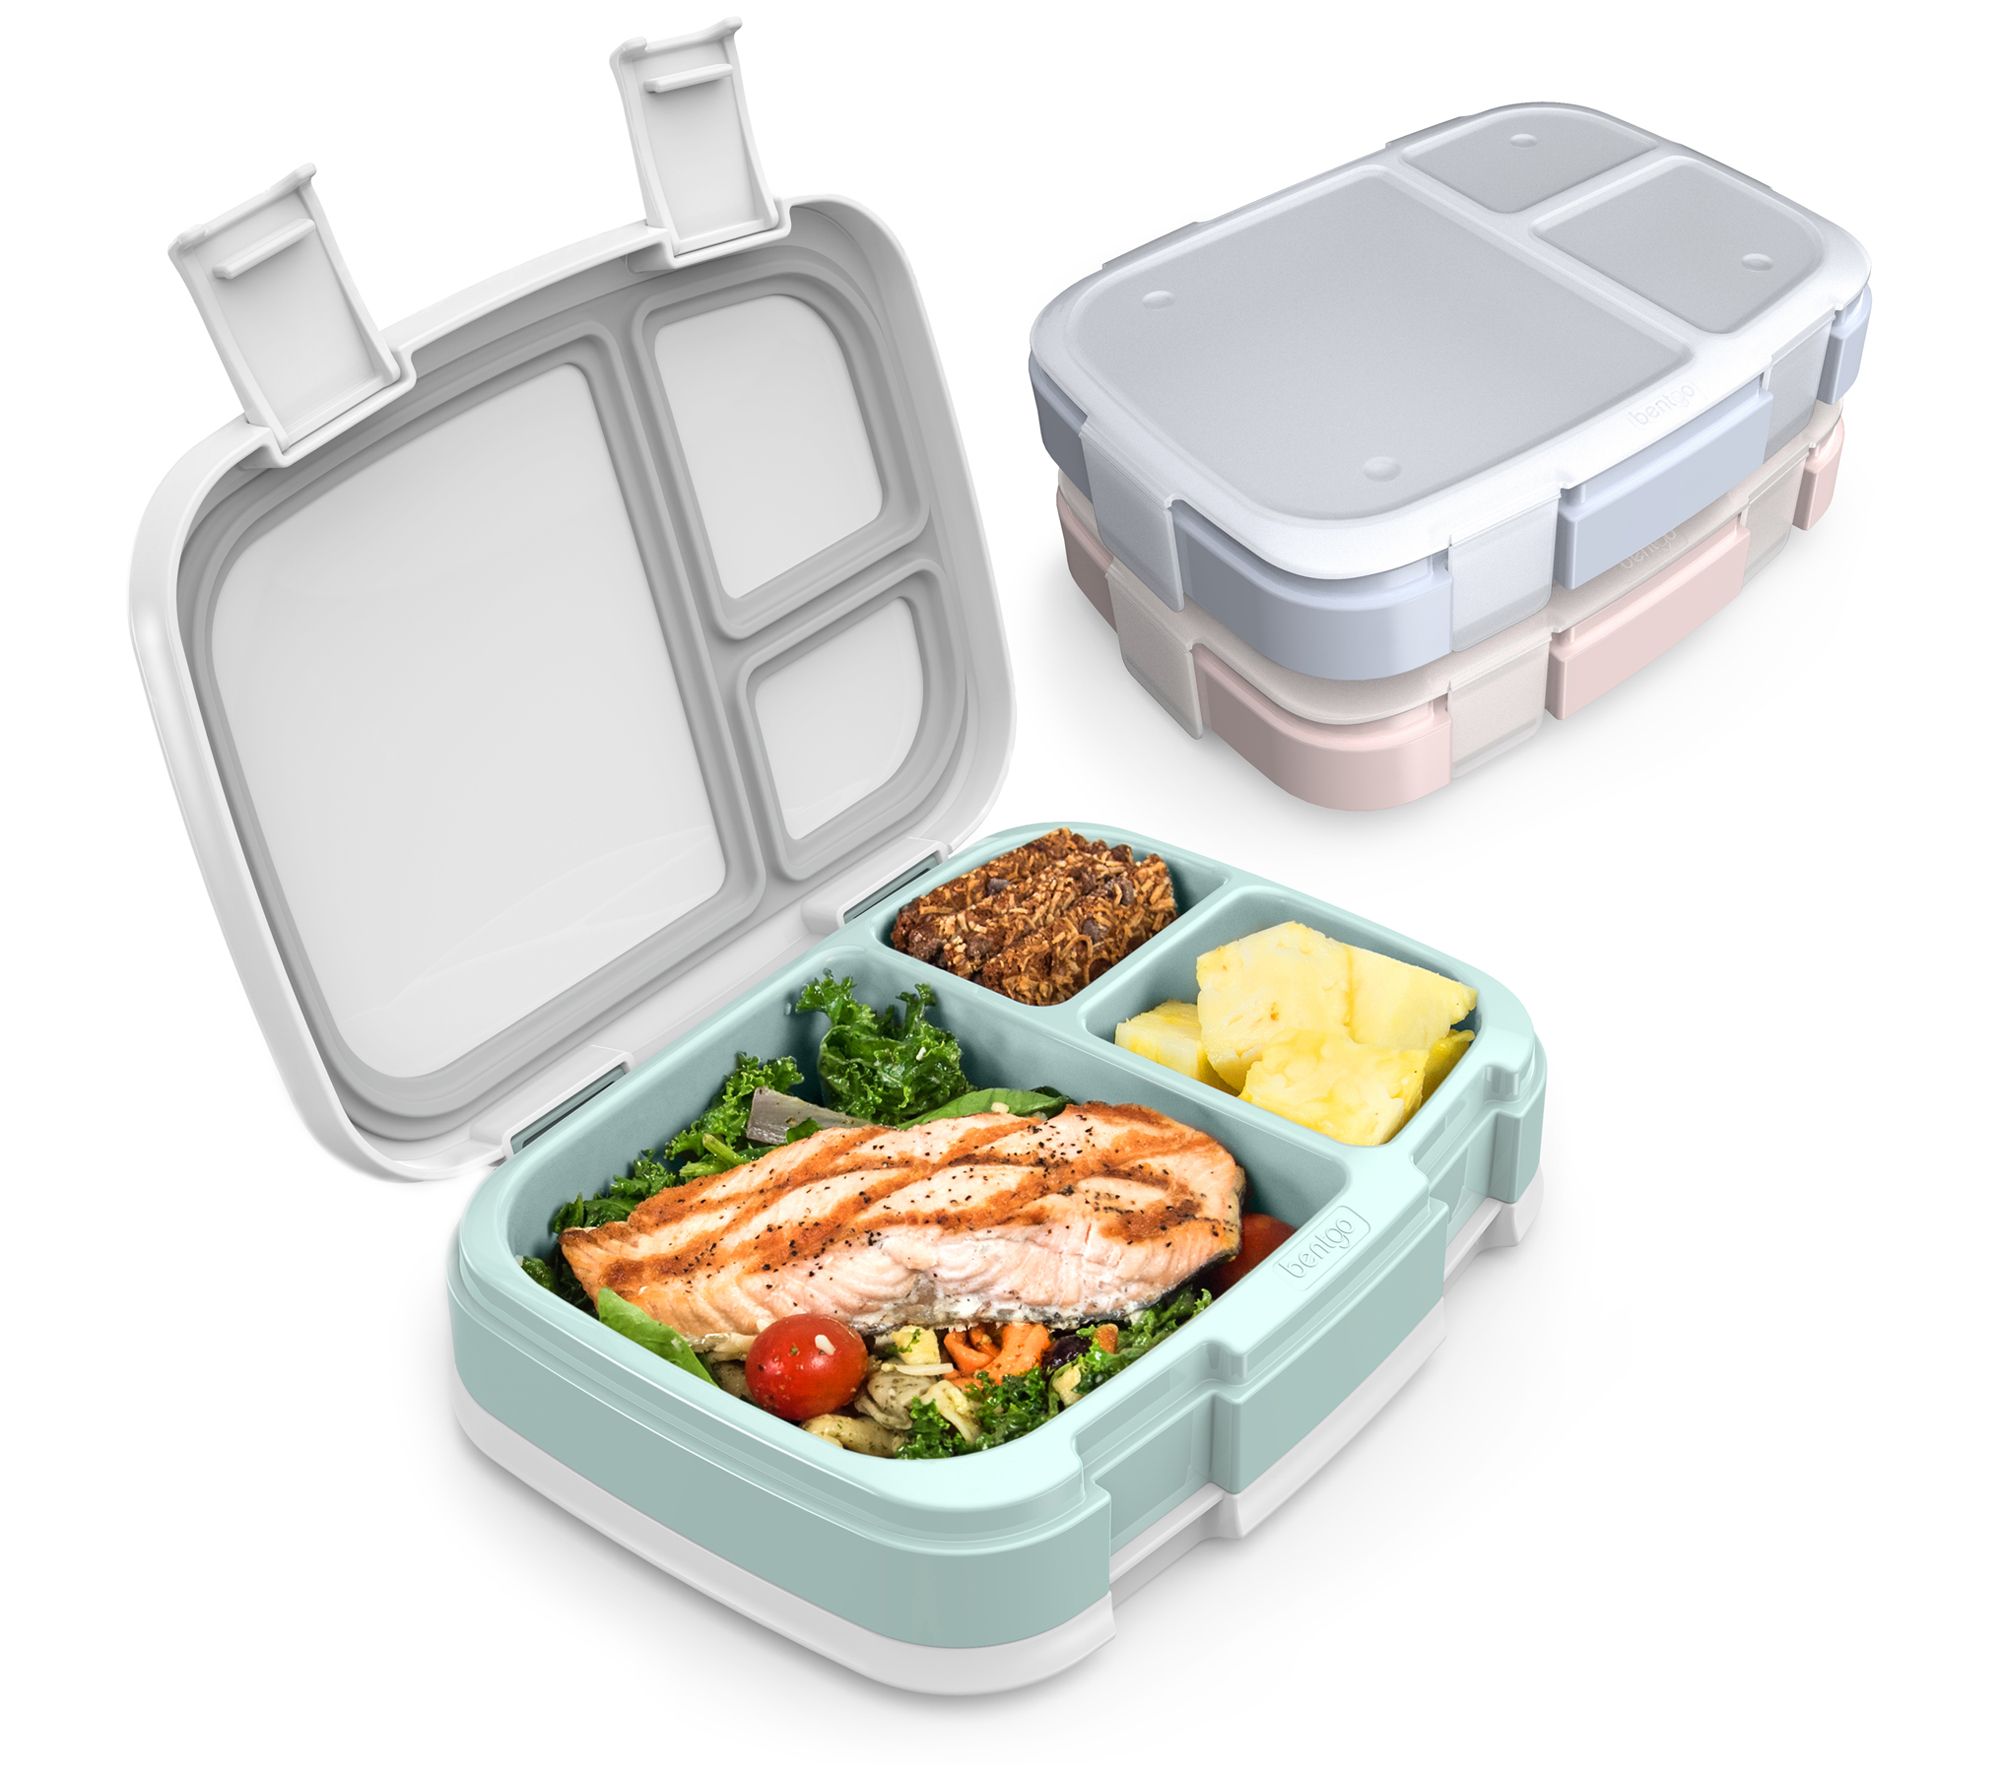 Bentgo Stainless - Leak-Proof Bento-Style Lunch Box with Removable Divider, Black